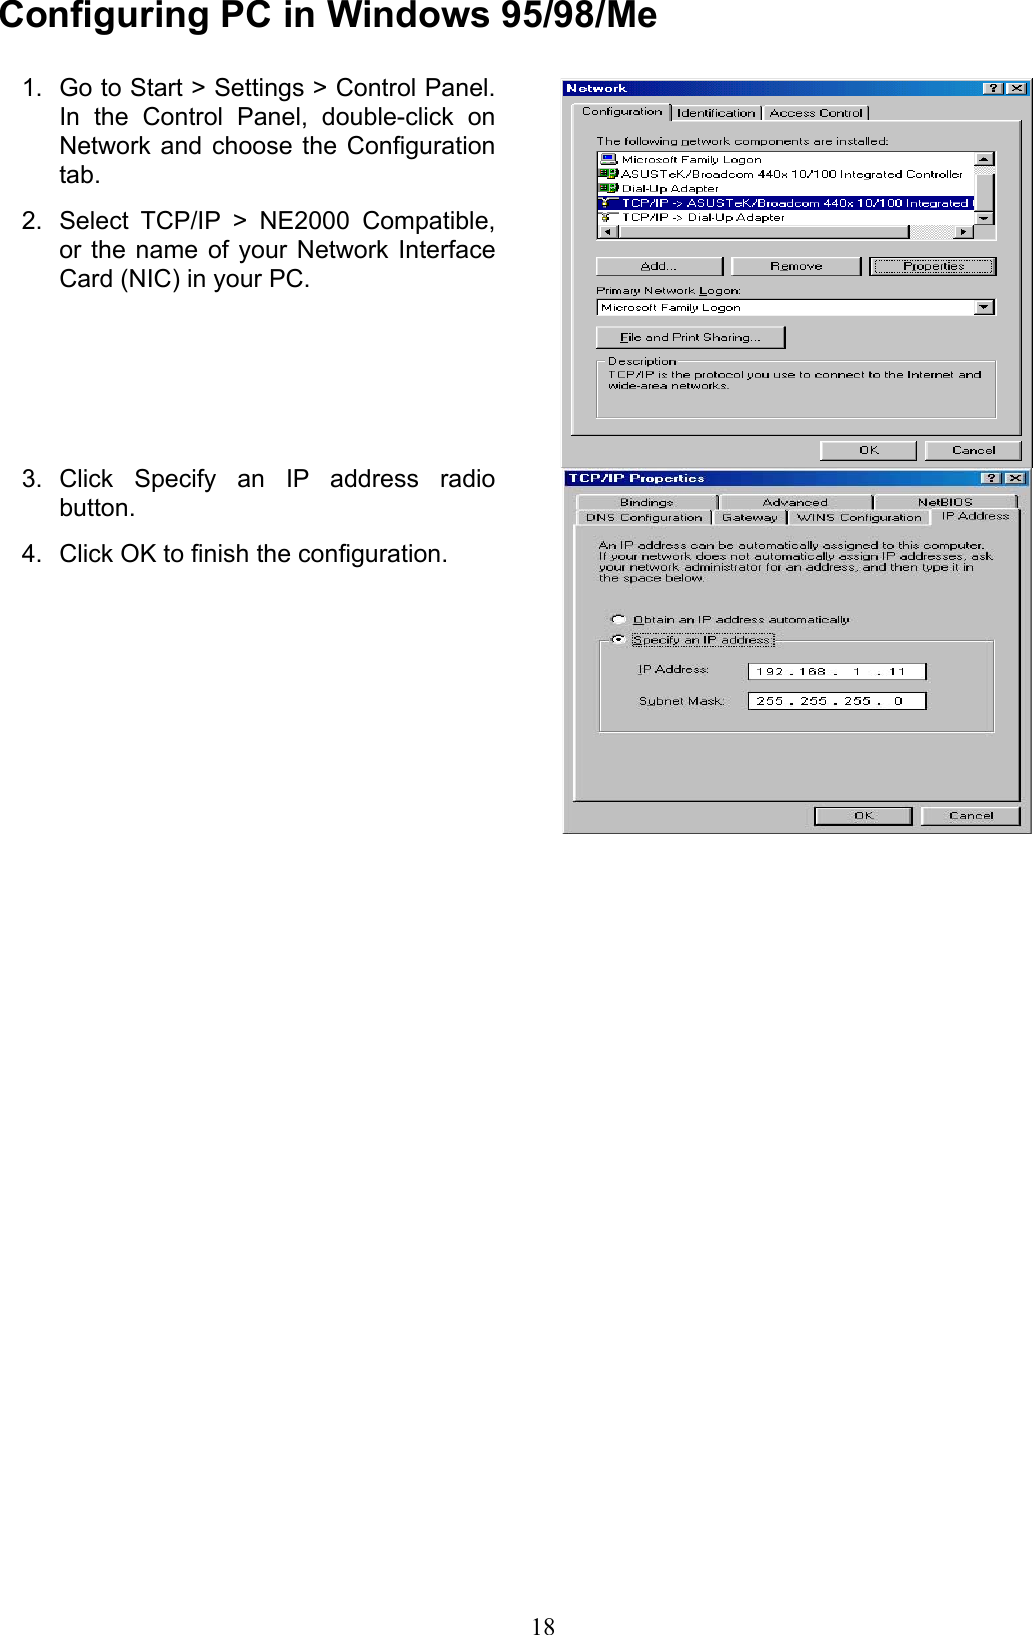 Conguring PC in Windows 95/98/MeGo to Start &gt; Settings &gt; Control Panel. 1. In  the  Control  Panel,  double-click  on Network and choose  the  Conguration tab.Select  TCP/IP  &gt;  NE2000  Compatible, 2. or the name  of  your  Network  Interface Card (NIC) in your PC.Click  Specify  an  IP  address  radio 3. button.Click OK to nish the conguration.4. 18